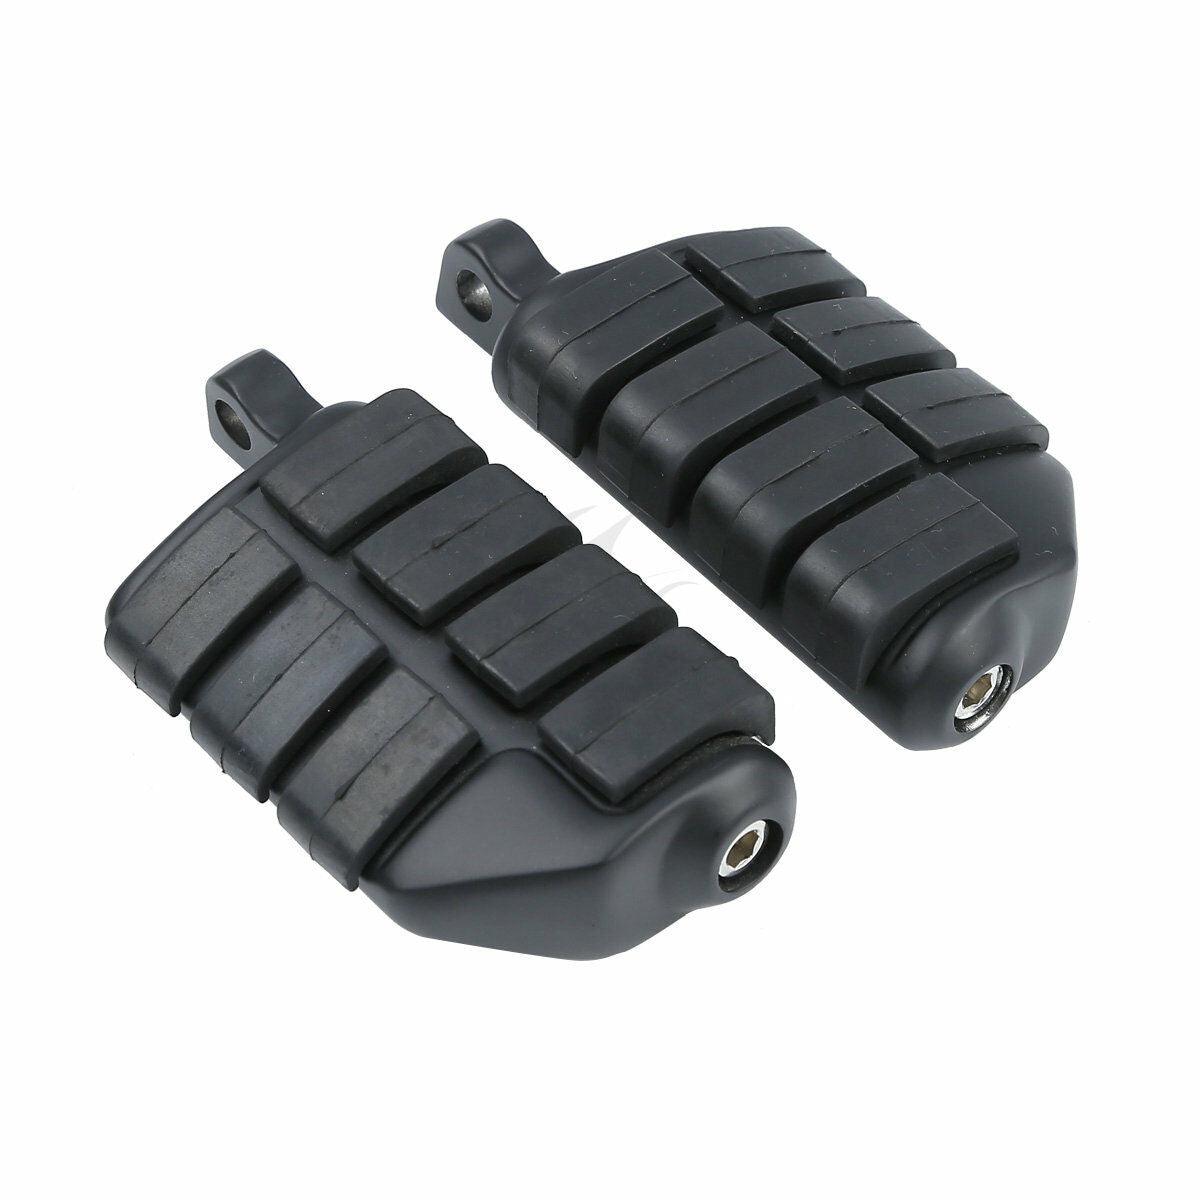 Matte Male Mount Footrests Foot Pegs Fit For Harley Touring Softail Sportster XL - Moto Life Products